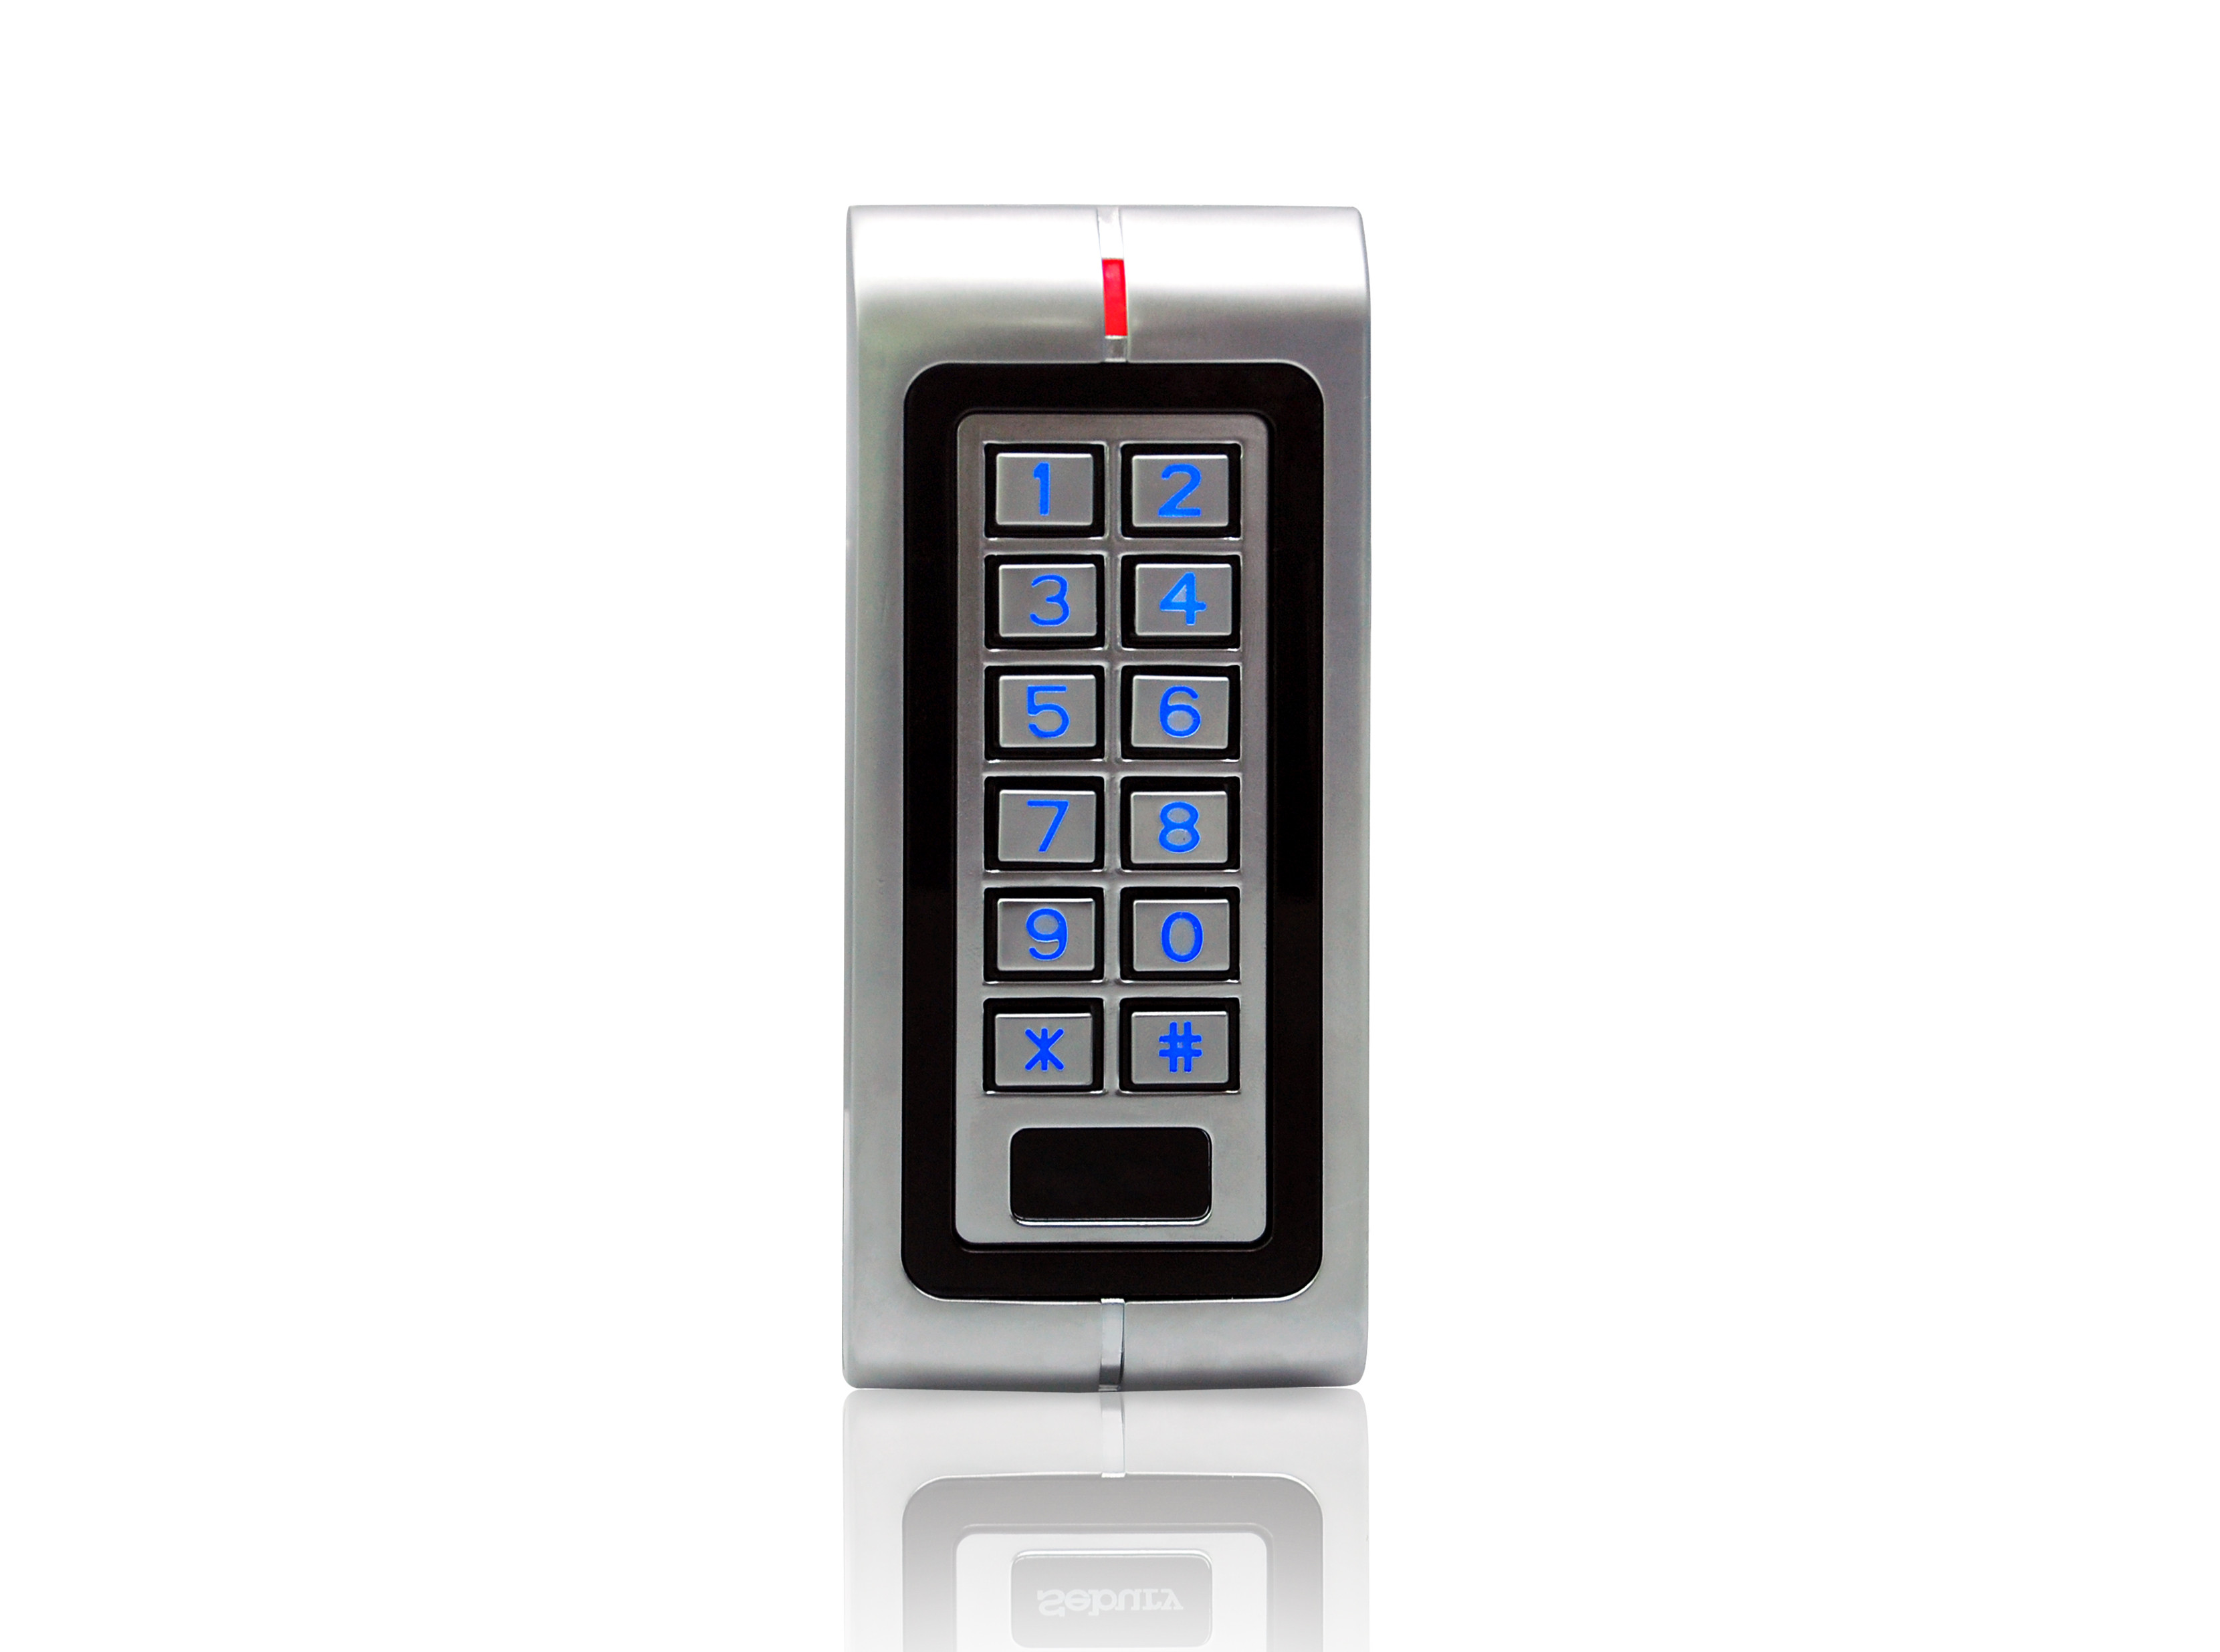  Wetherproof Metal Standalone Keypad Access Control Gate Entry Keypad Manufactures